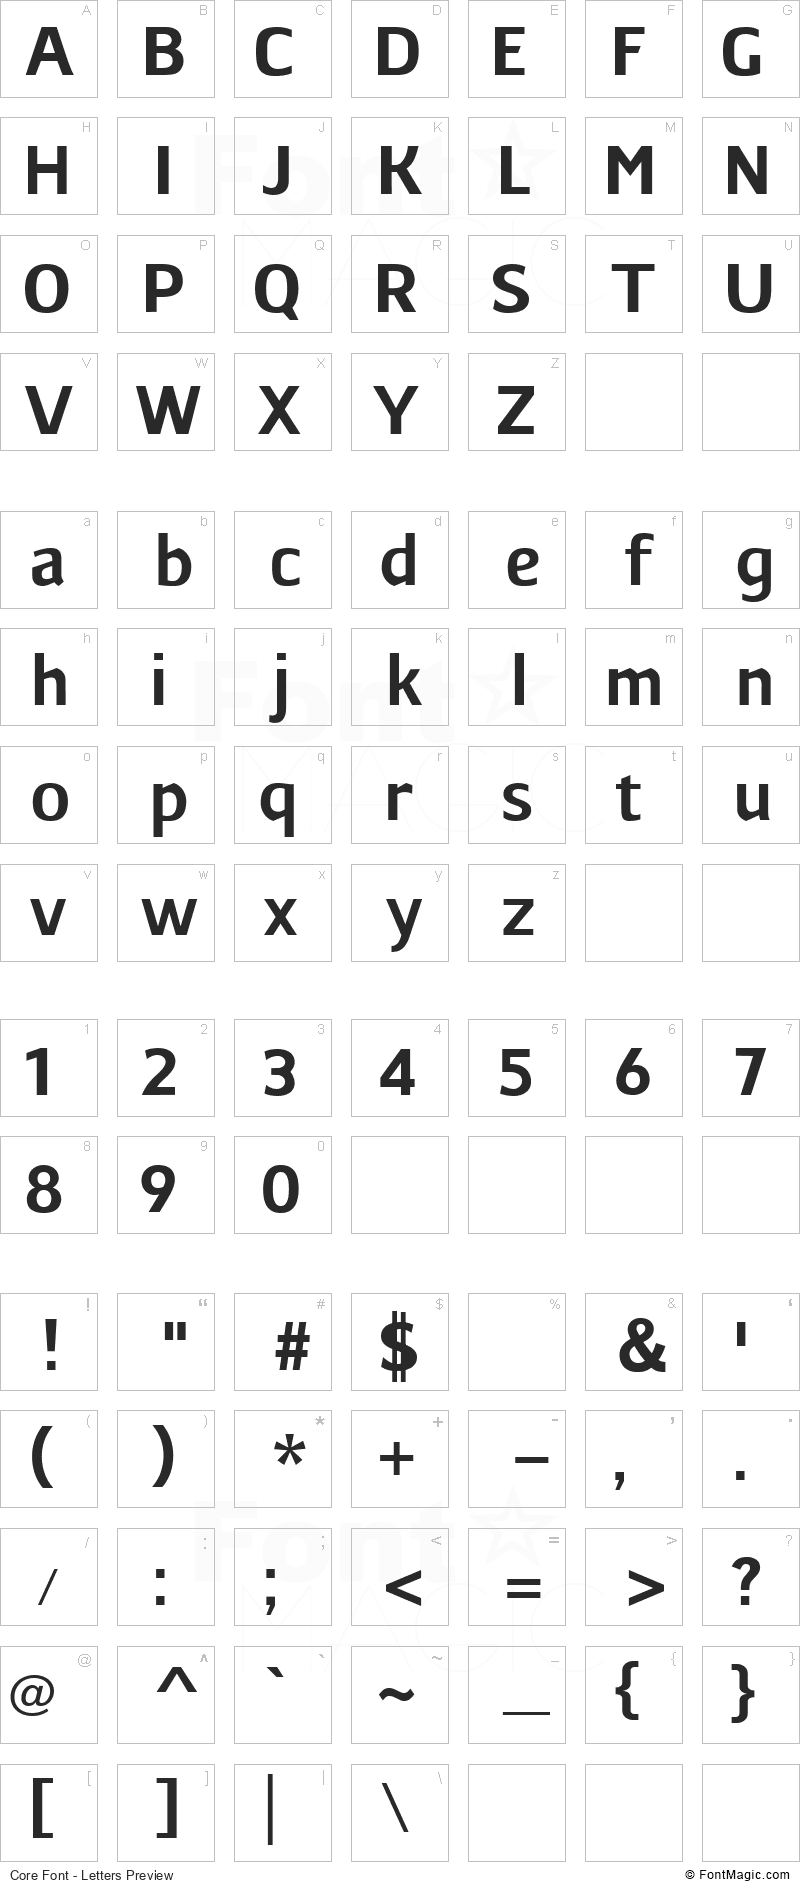 Core Font - All Latters Preview Chart